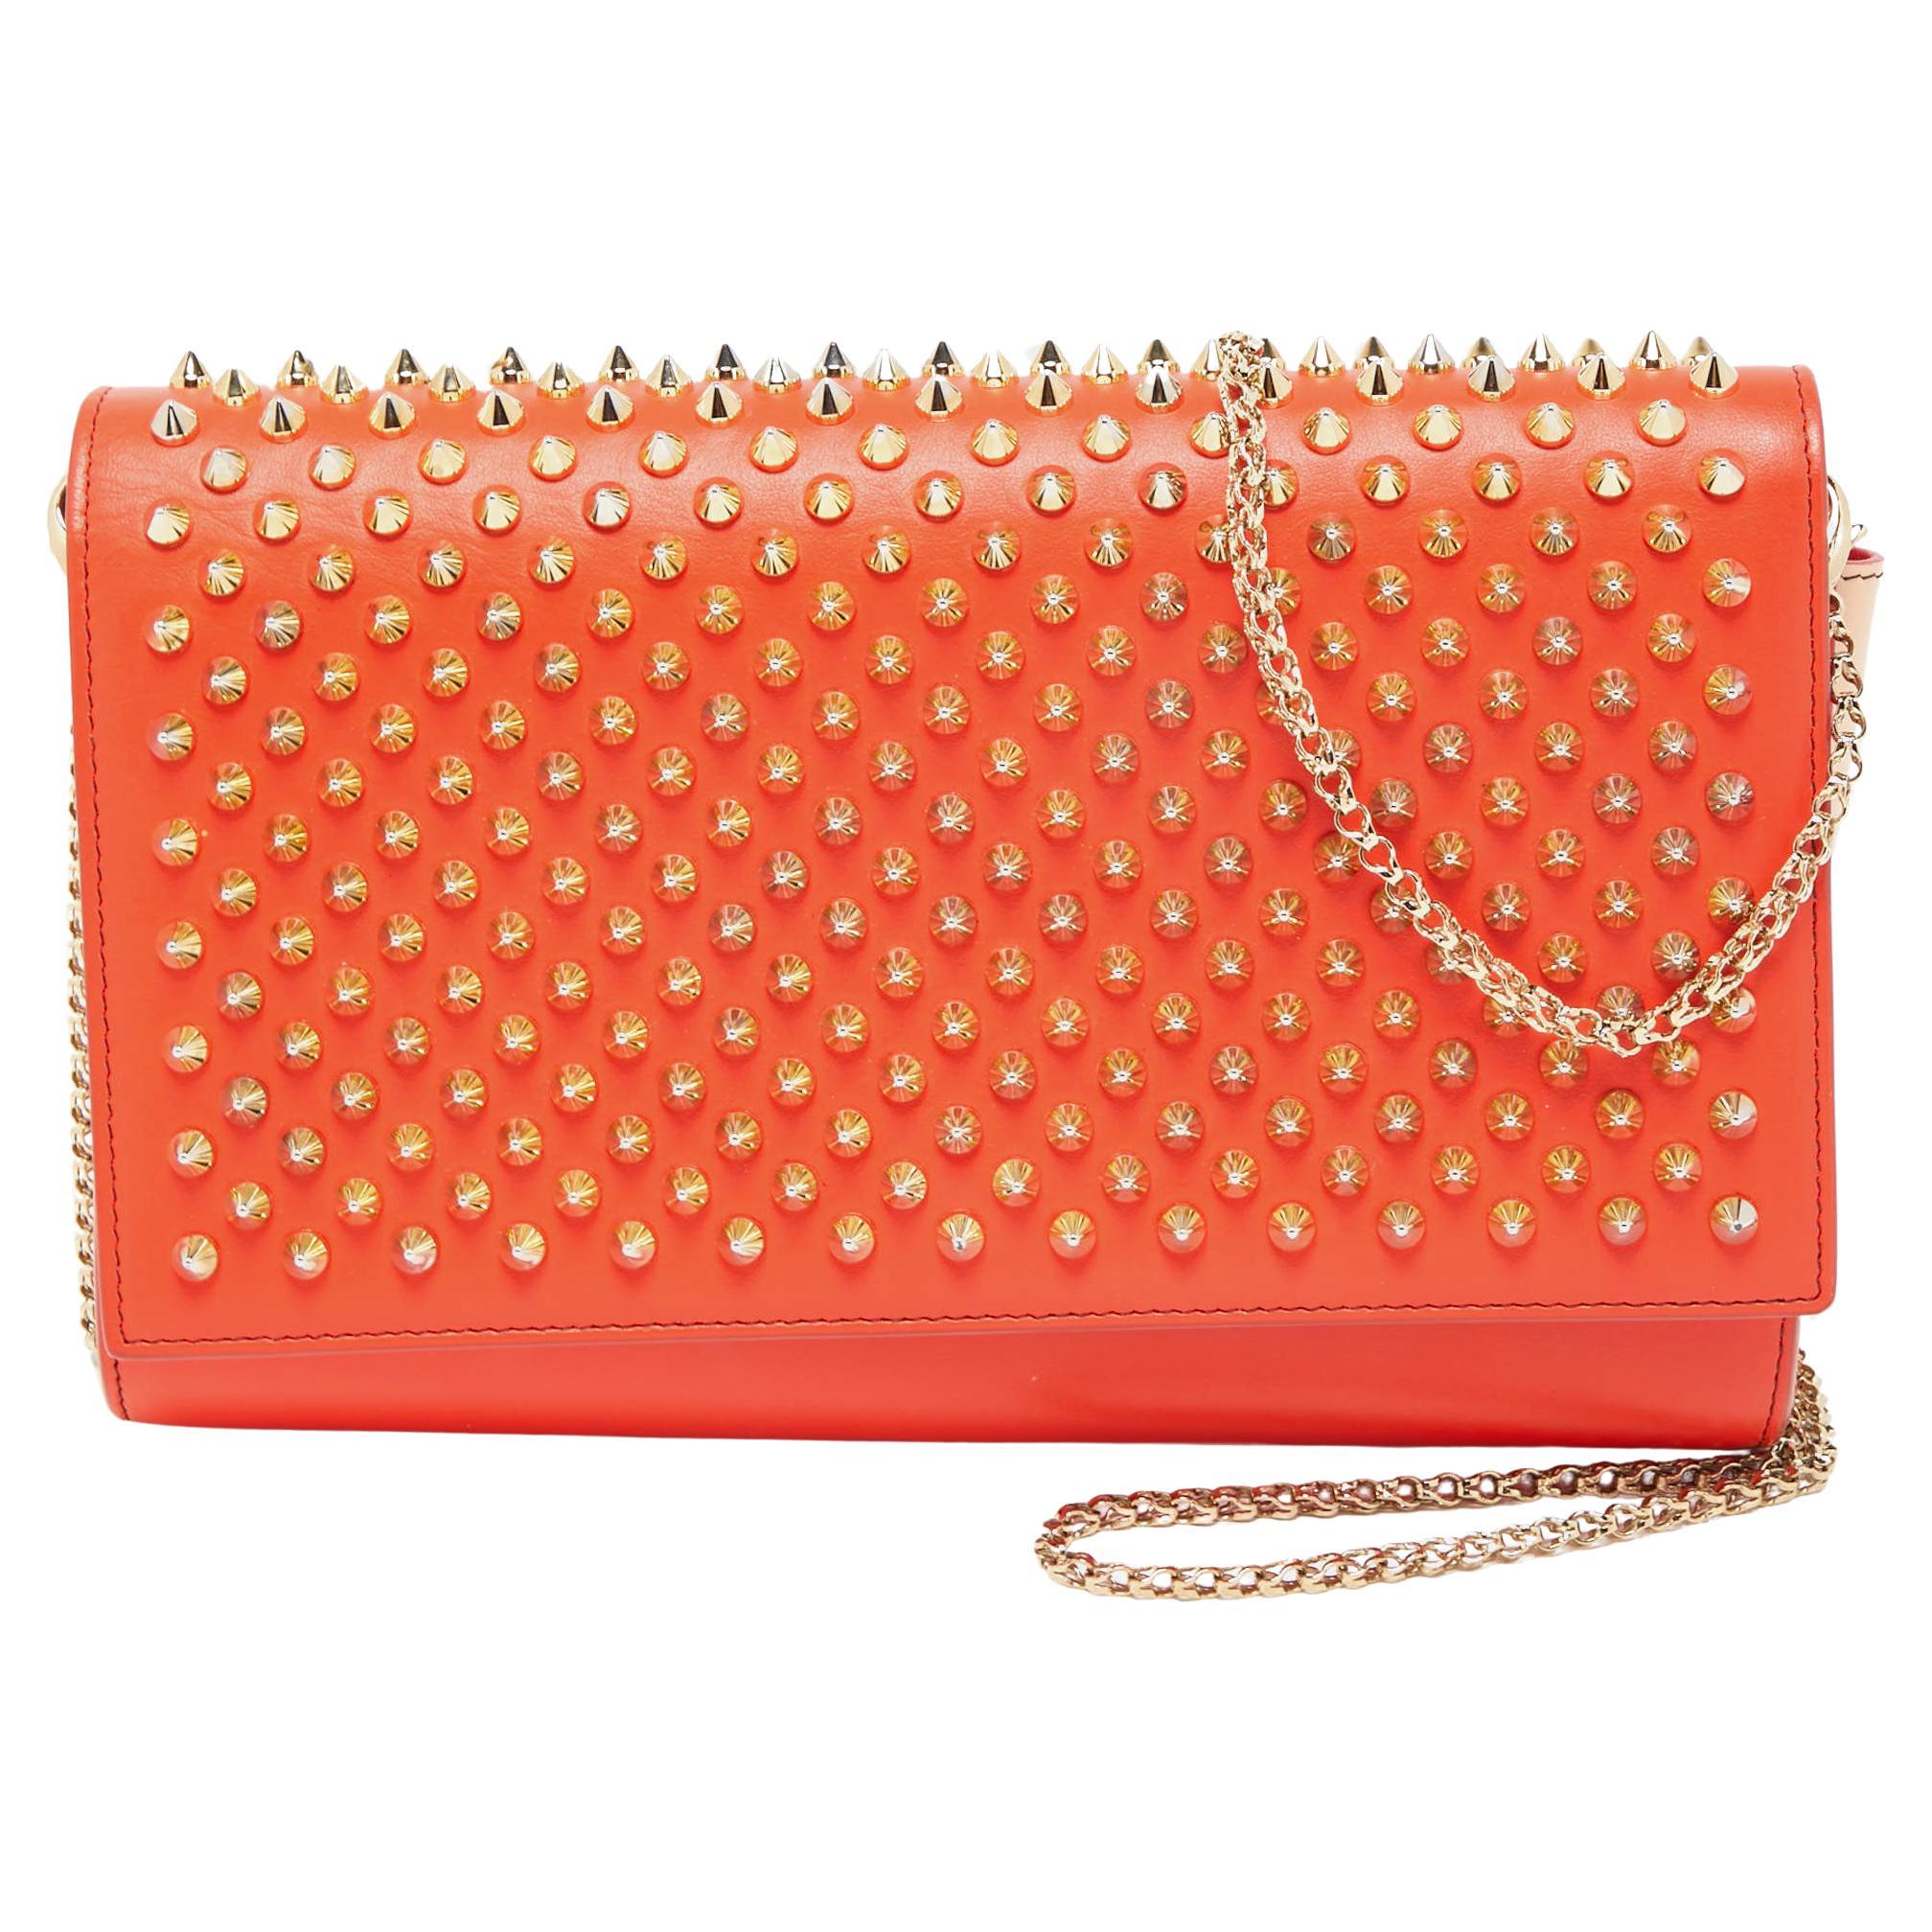 Christian Louboutin Orange Leather Paloma Spiked Chain Clutch